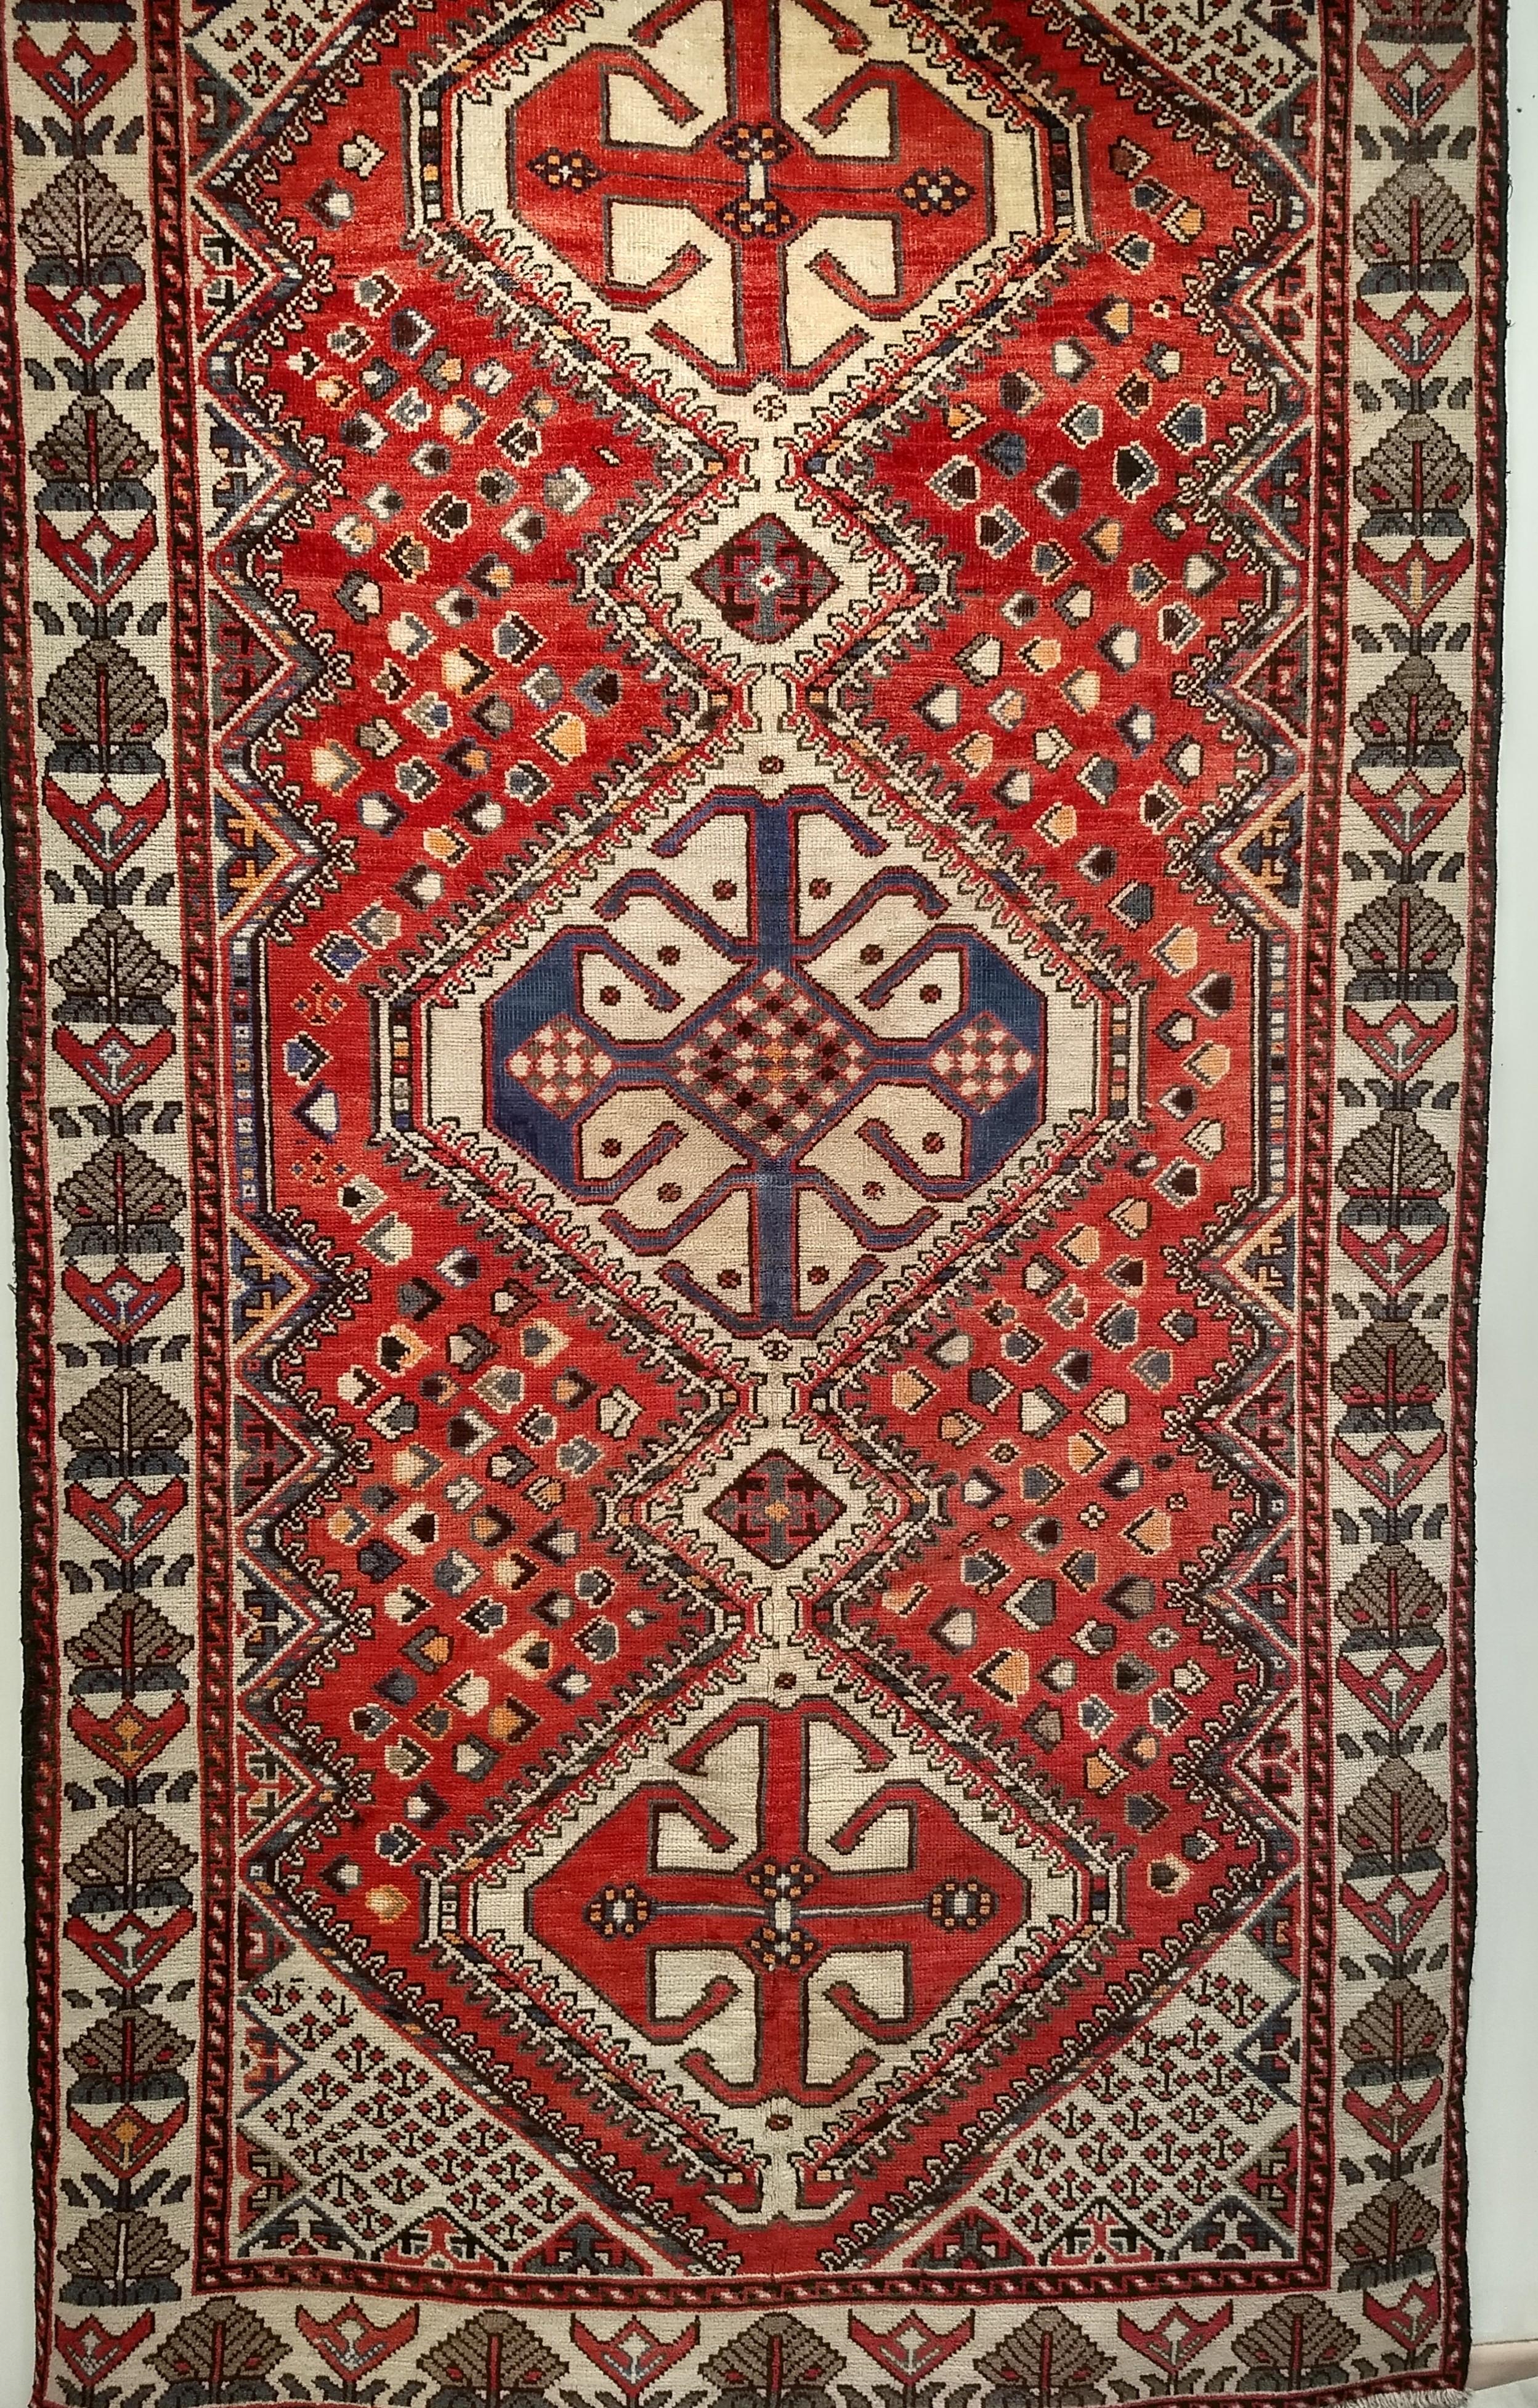 Vintage Persian Shiraz Tribal Area Rug in Red, Ivory, French Blue In Good Condition For Sale In Barrington, IL